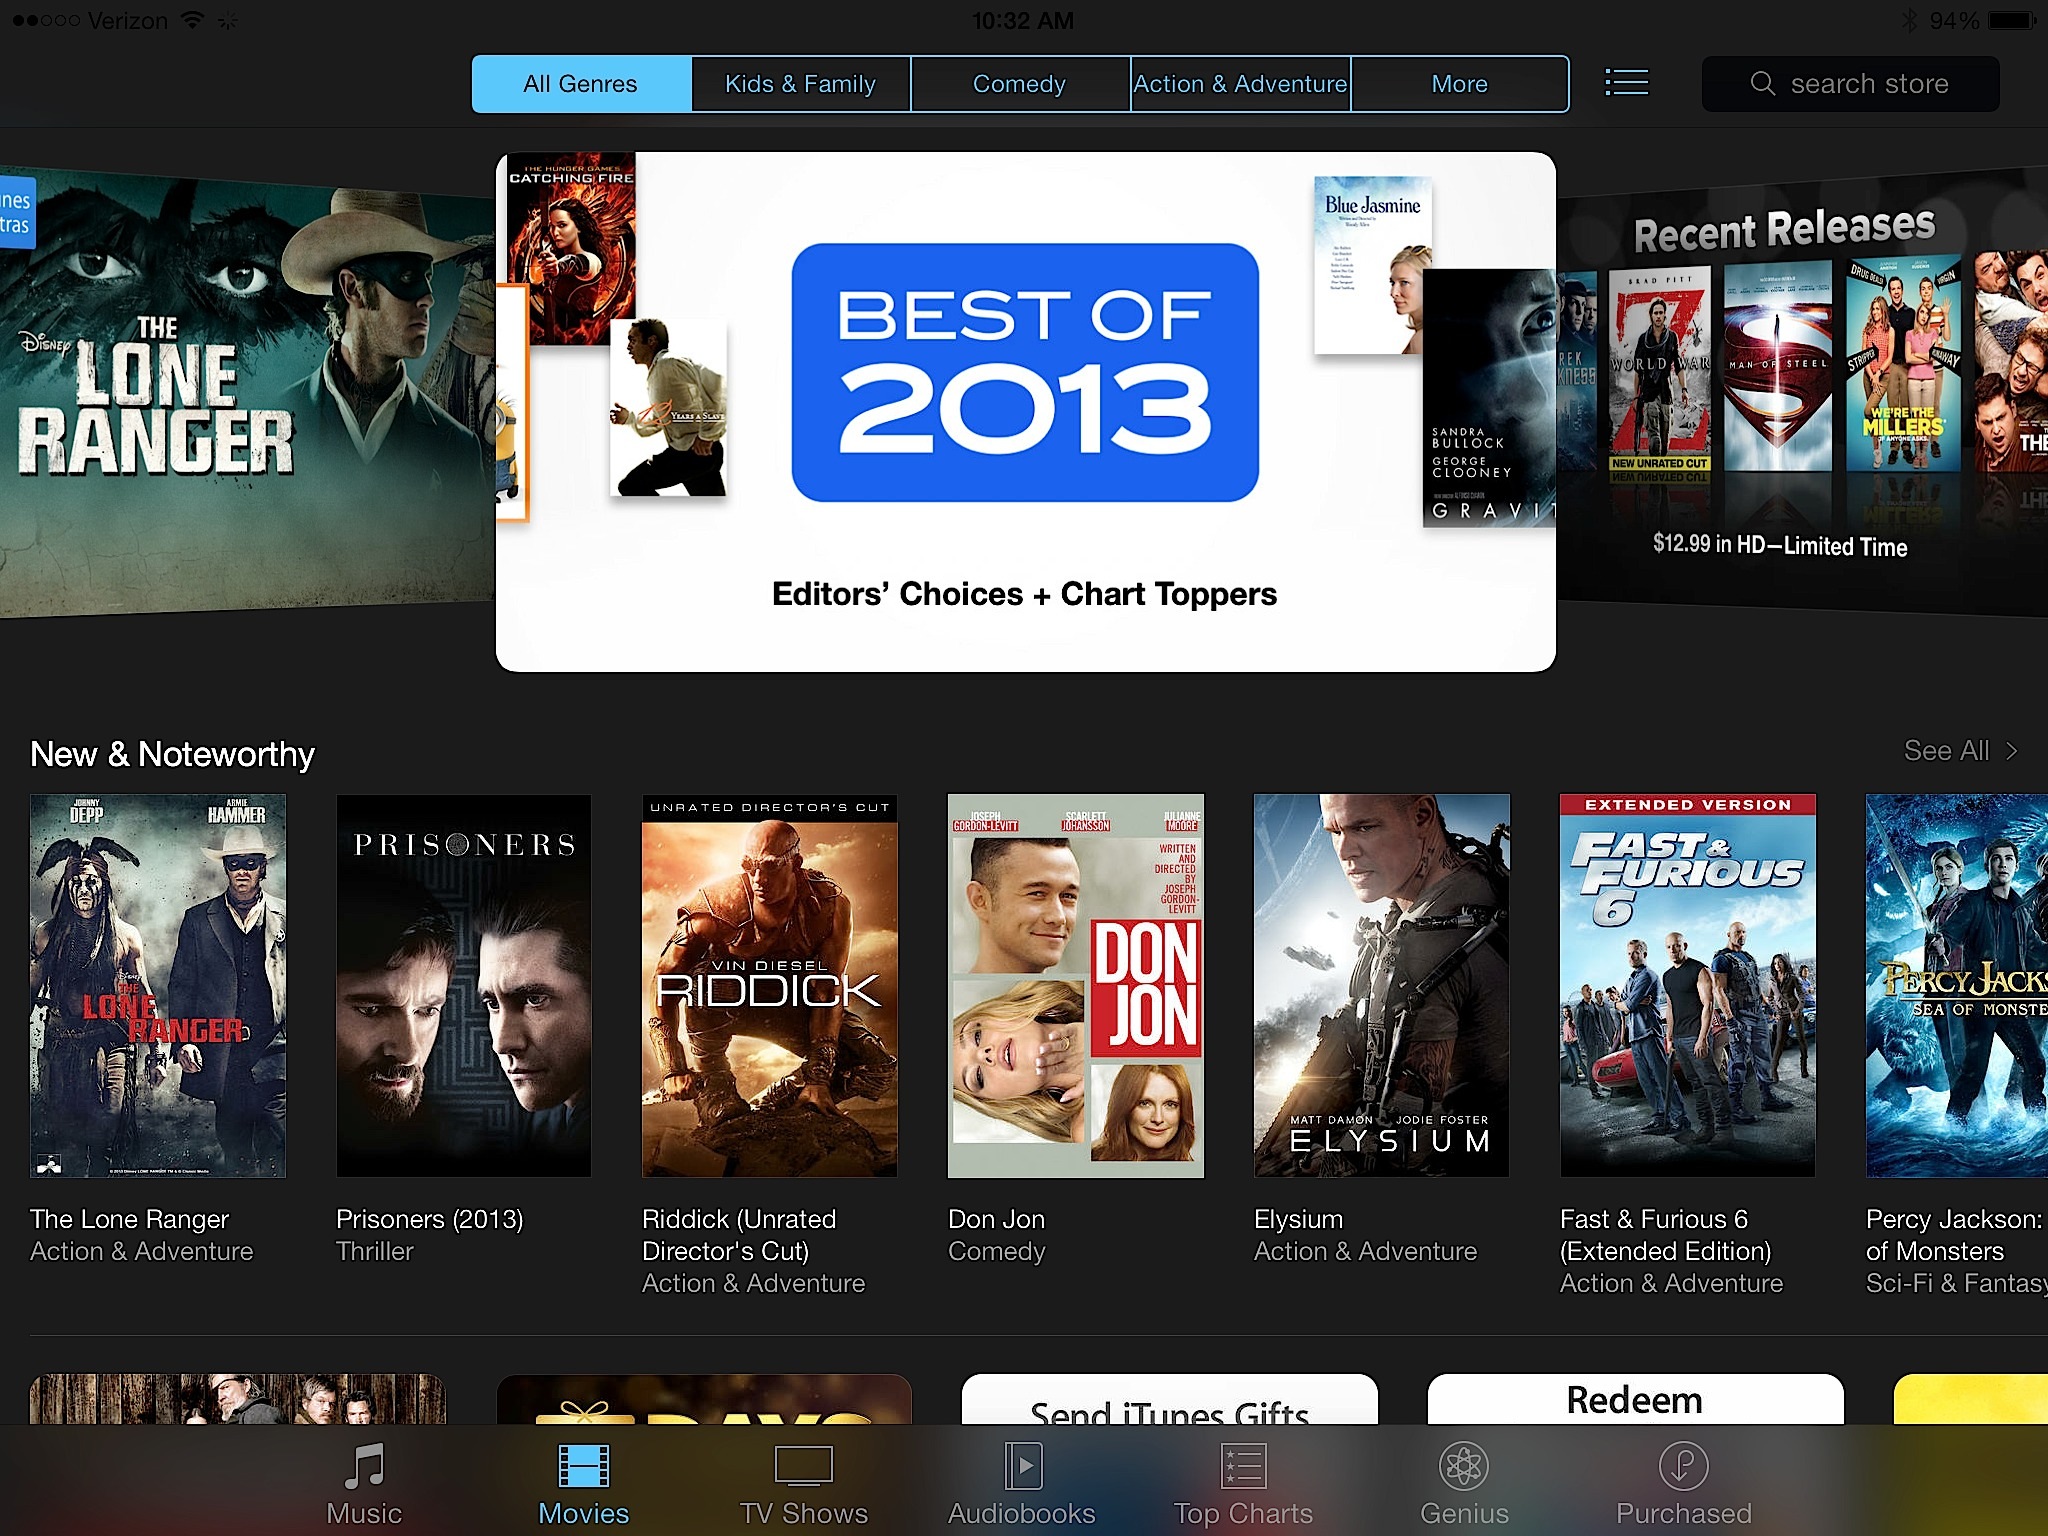 Tap on Movies to see the movies you can rent or buy on the iPad.